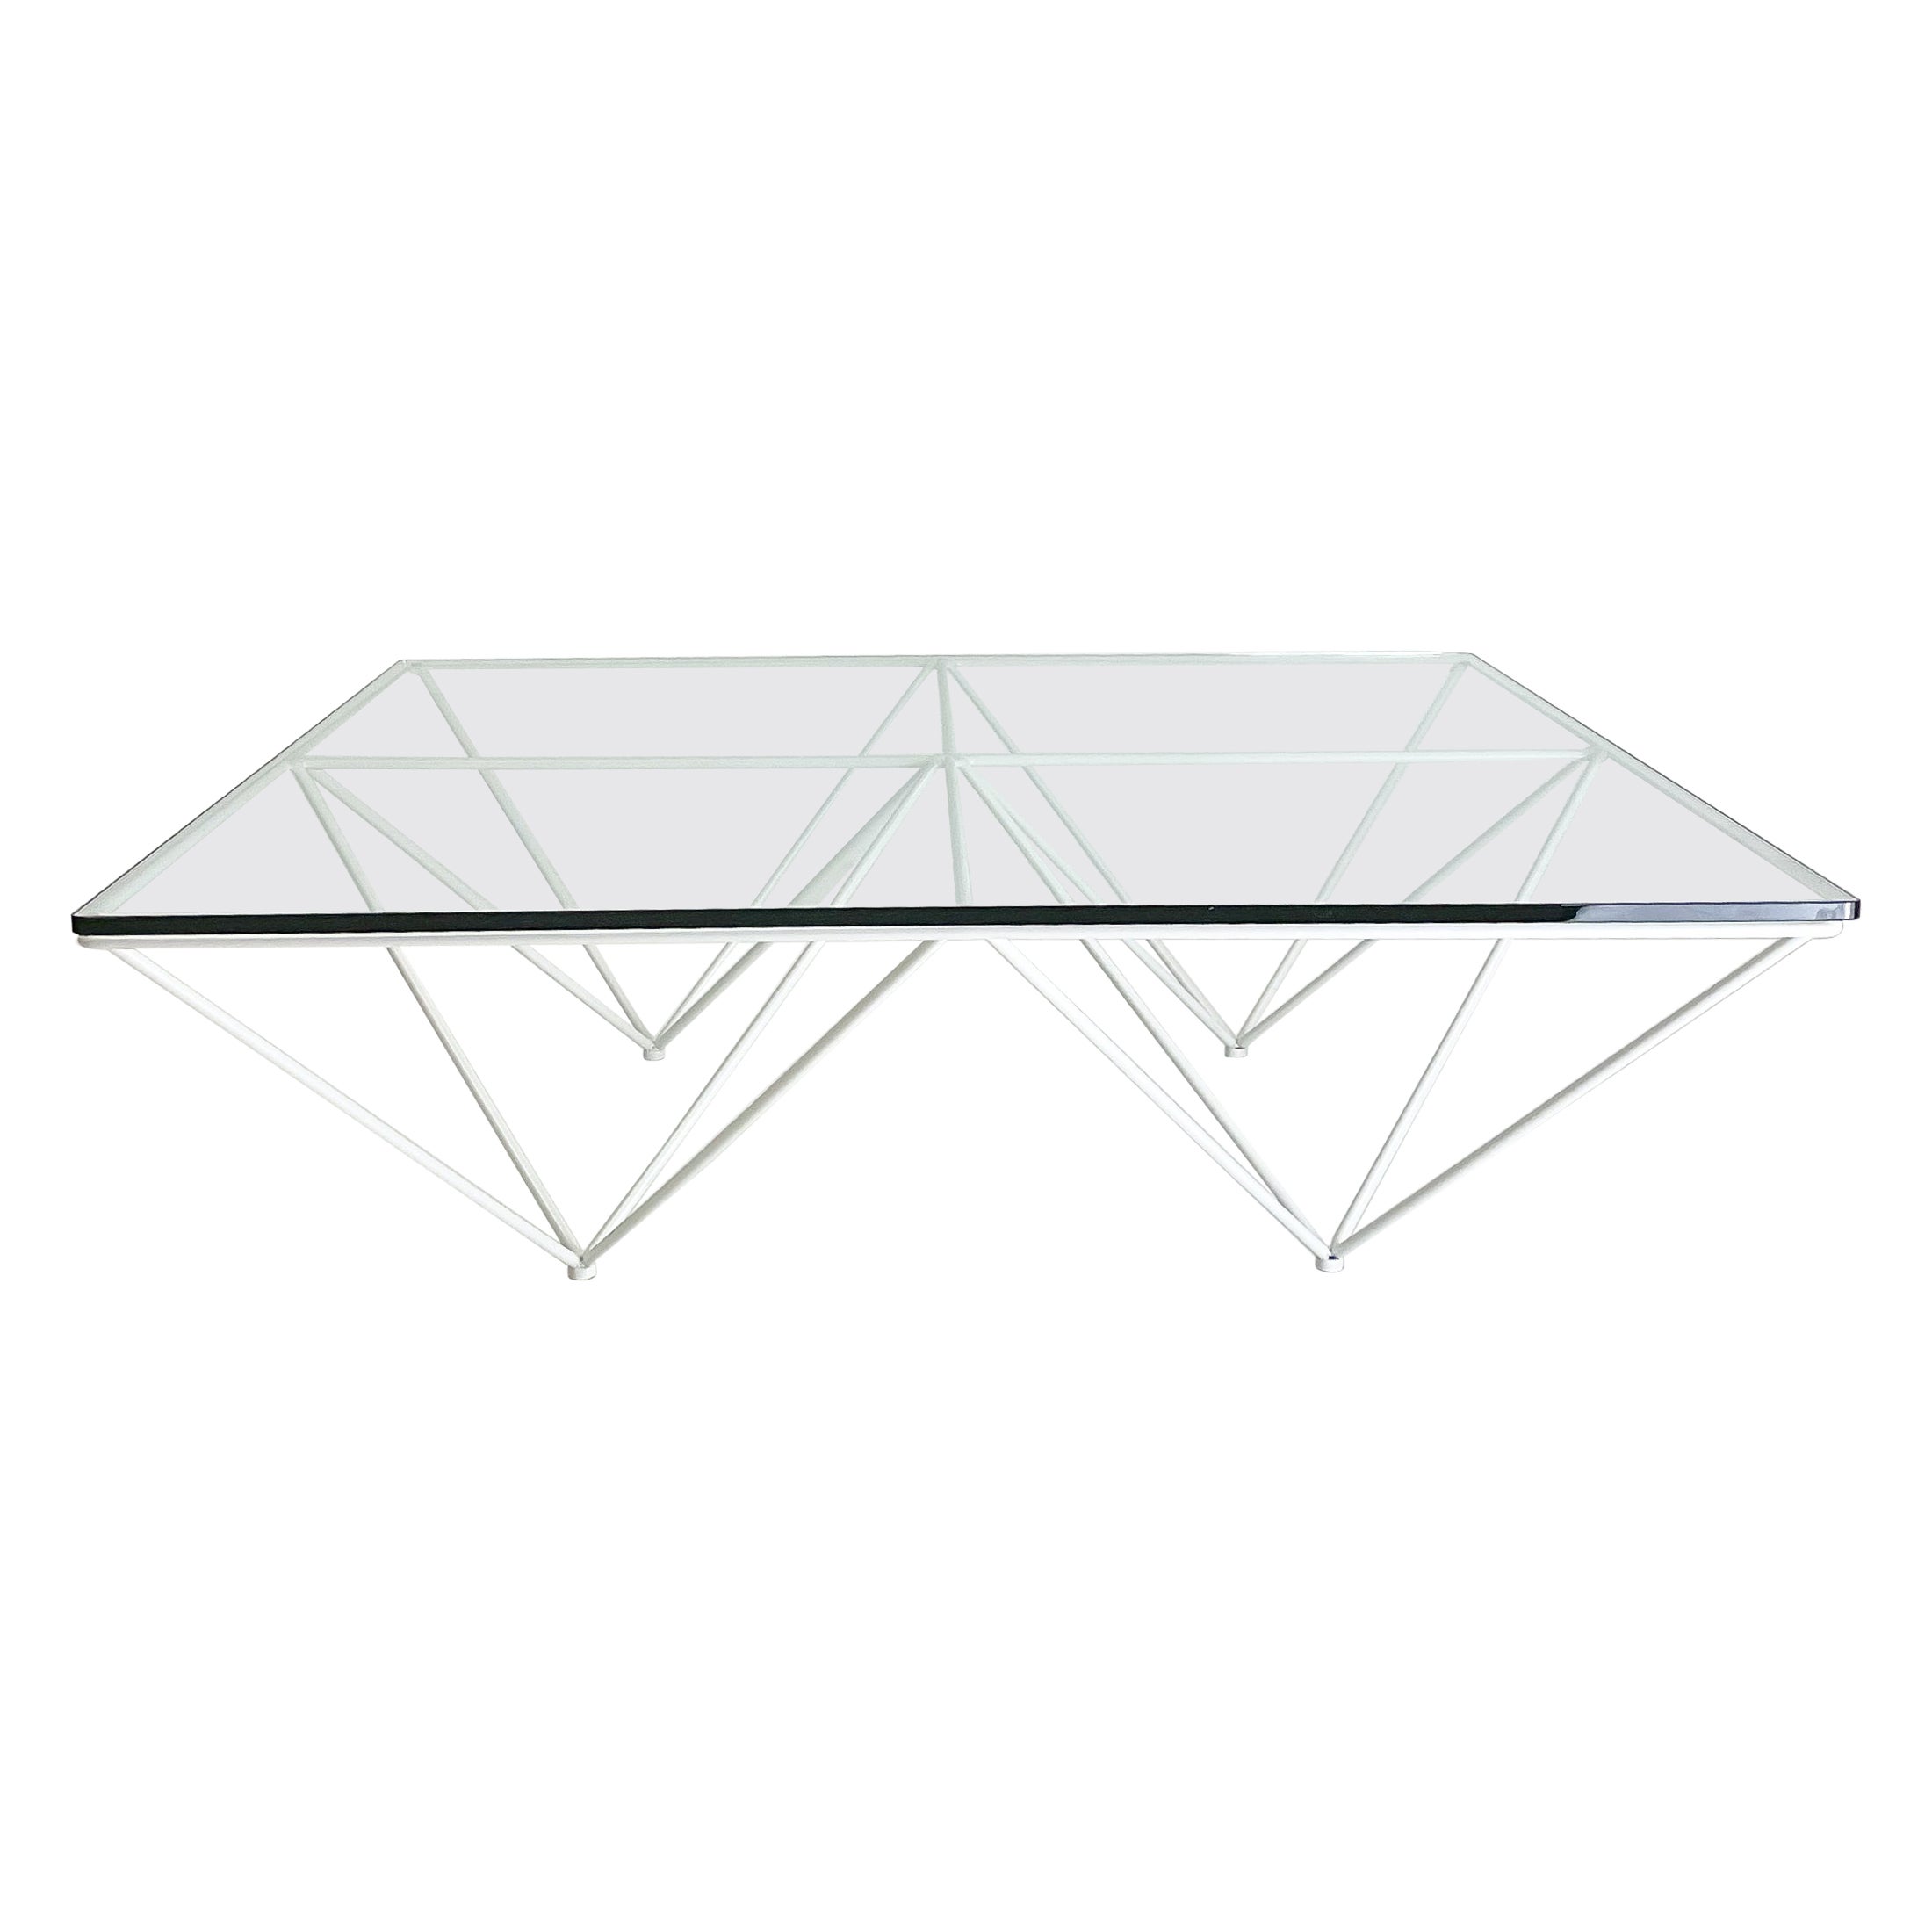 Paolo Piva Vintage Coffee Table Indoor Outdoor "Alanda" style Custom White For Sale